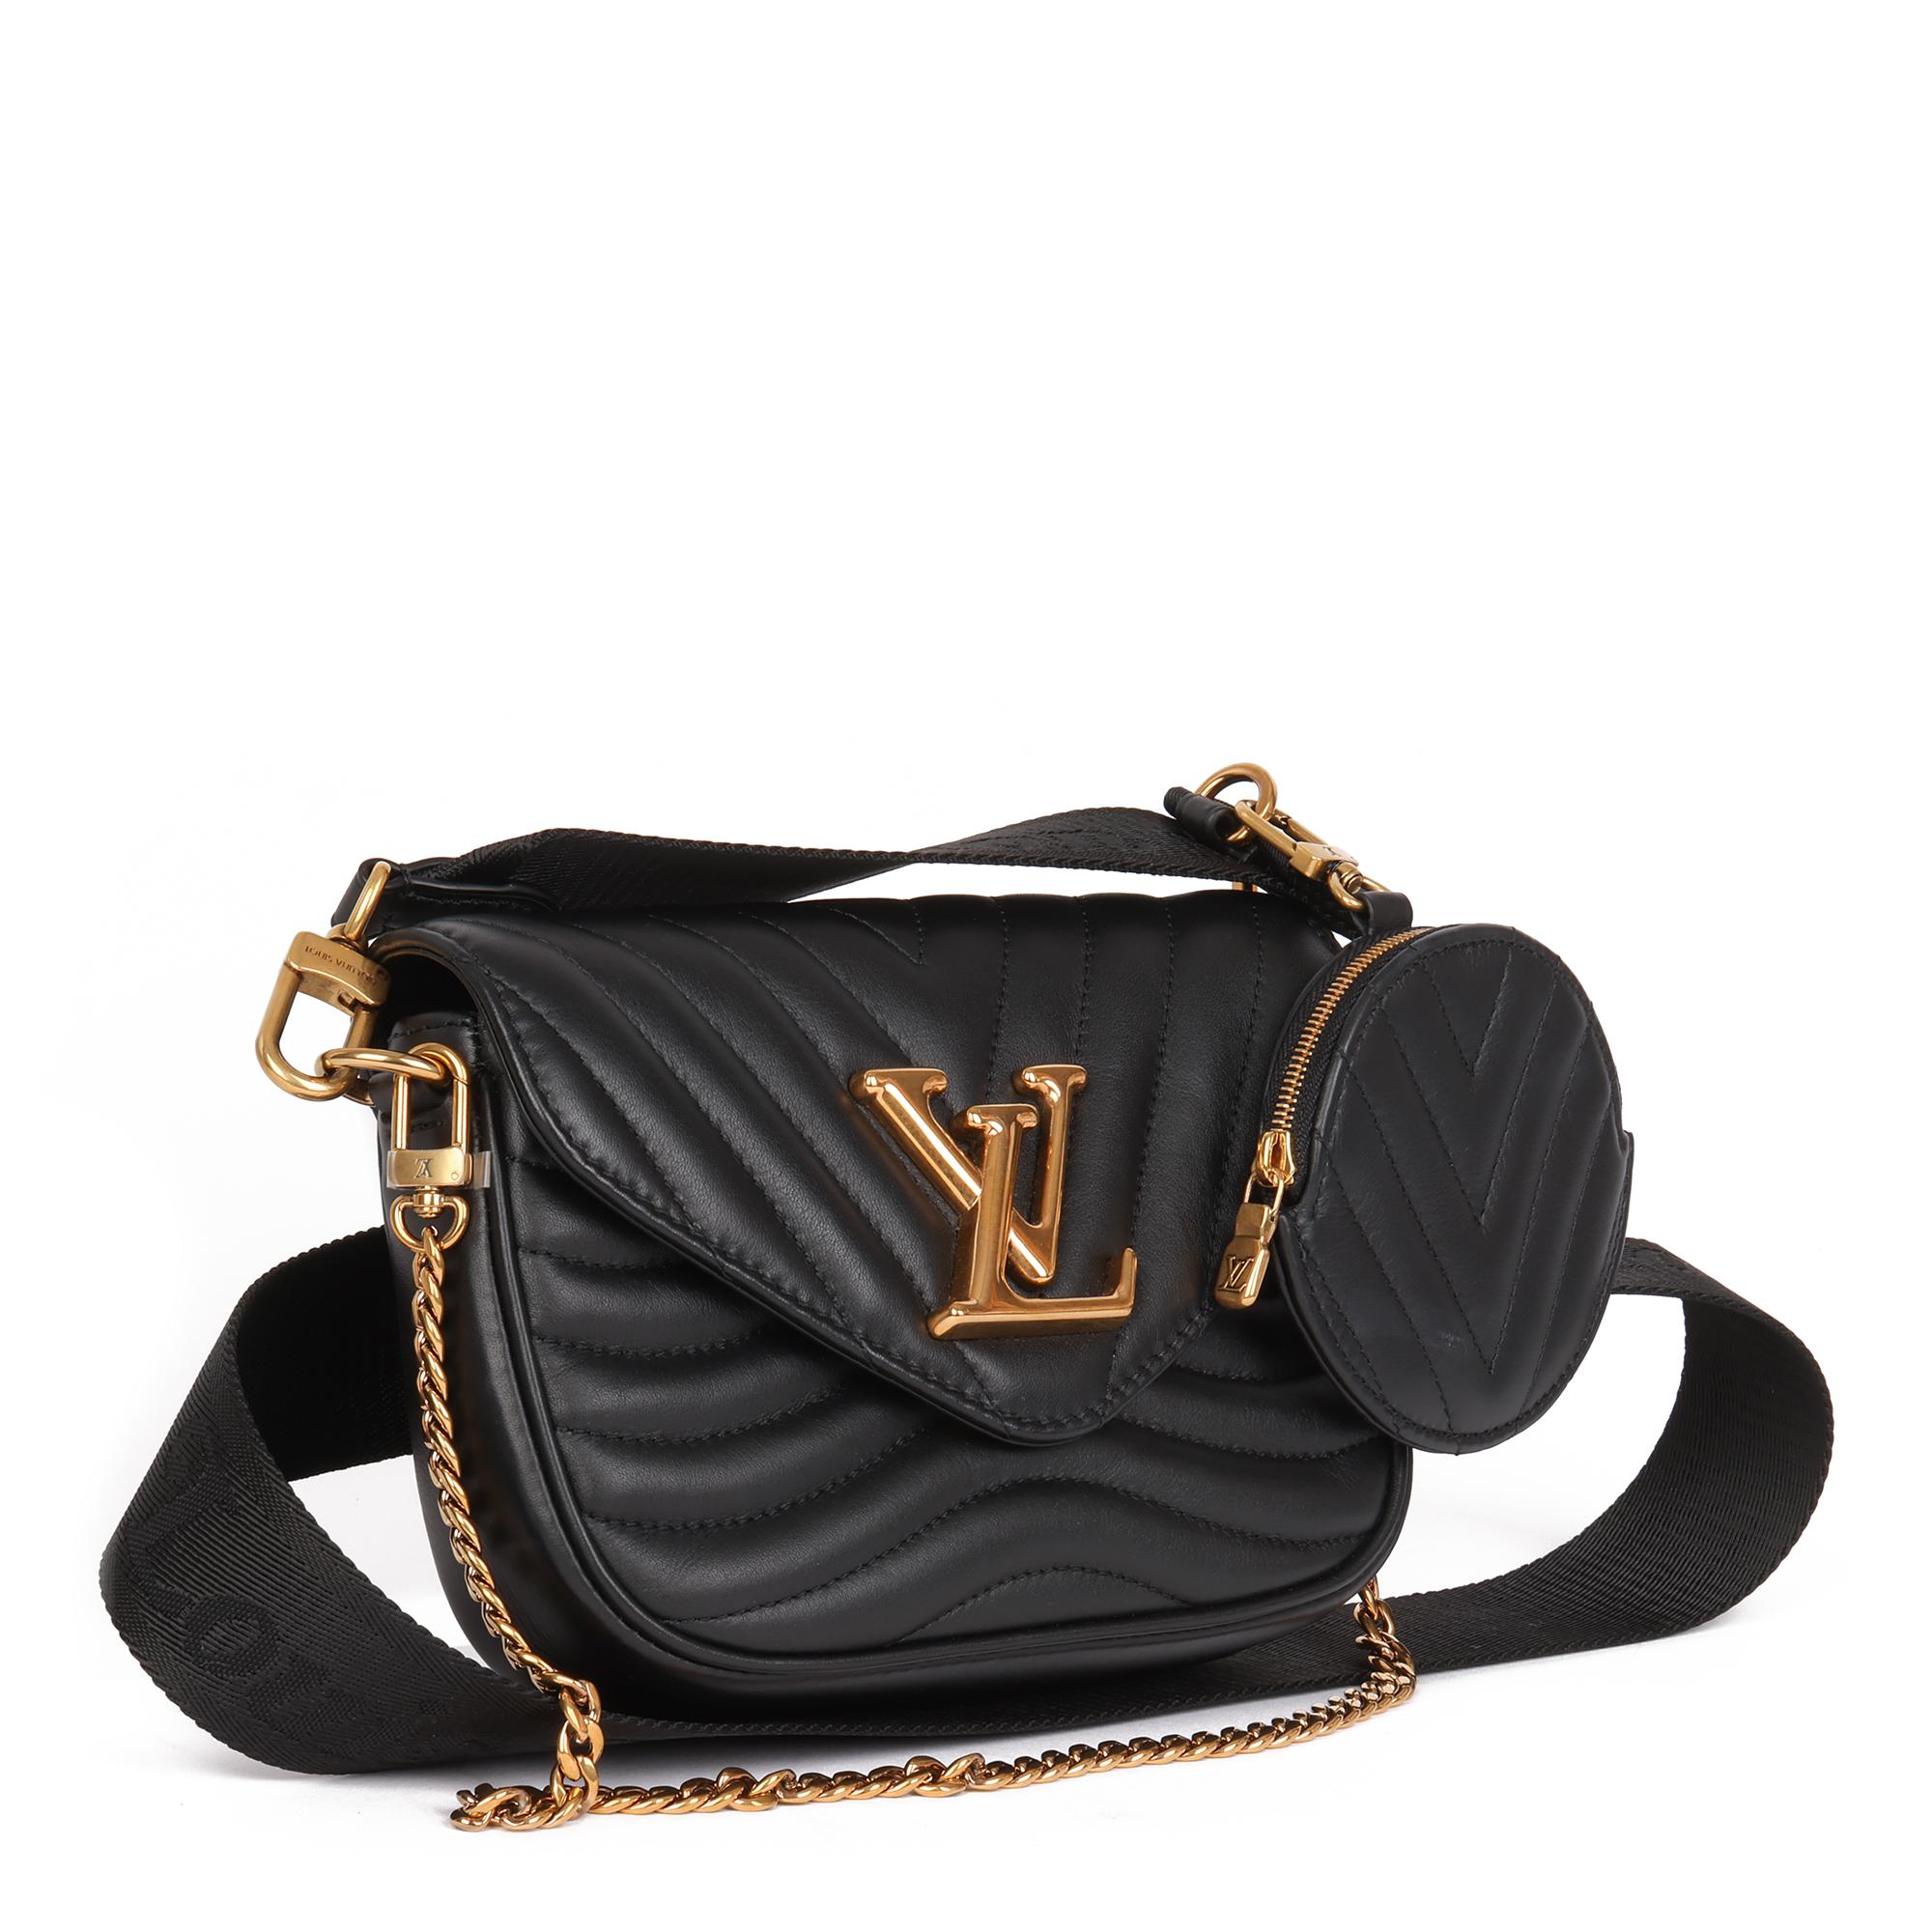 LOUIS VUITTON
Black Chevron Quilted Calfskin New Wave Multi Pochette 

Xupes Reference: HB4041
Serial Number: FK4210
Age (Circa): 2020
Accompanied By: Louis Vuitton Dust Bag, Box
Authenticity Details: Date Stamp (Made in Italy) 
Gender: Unisex
Type: